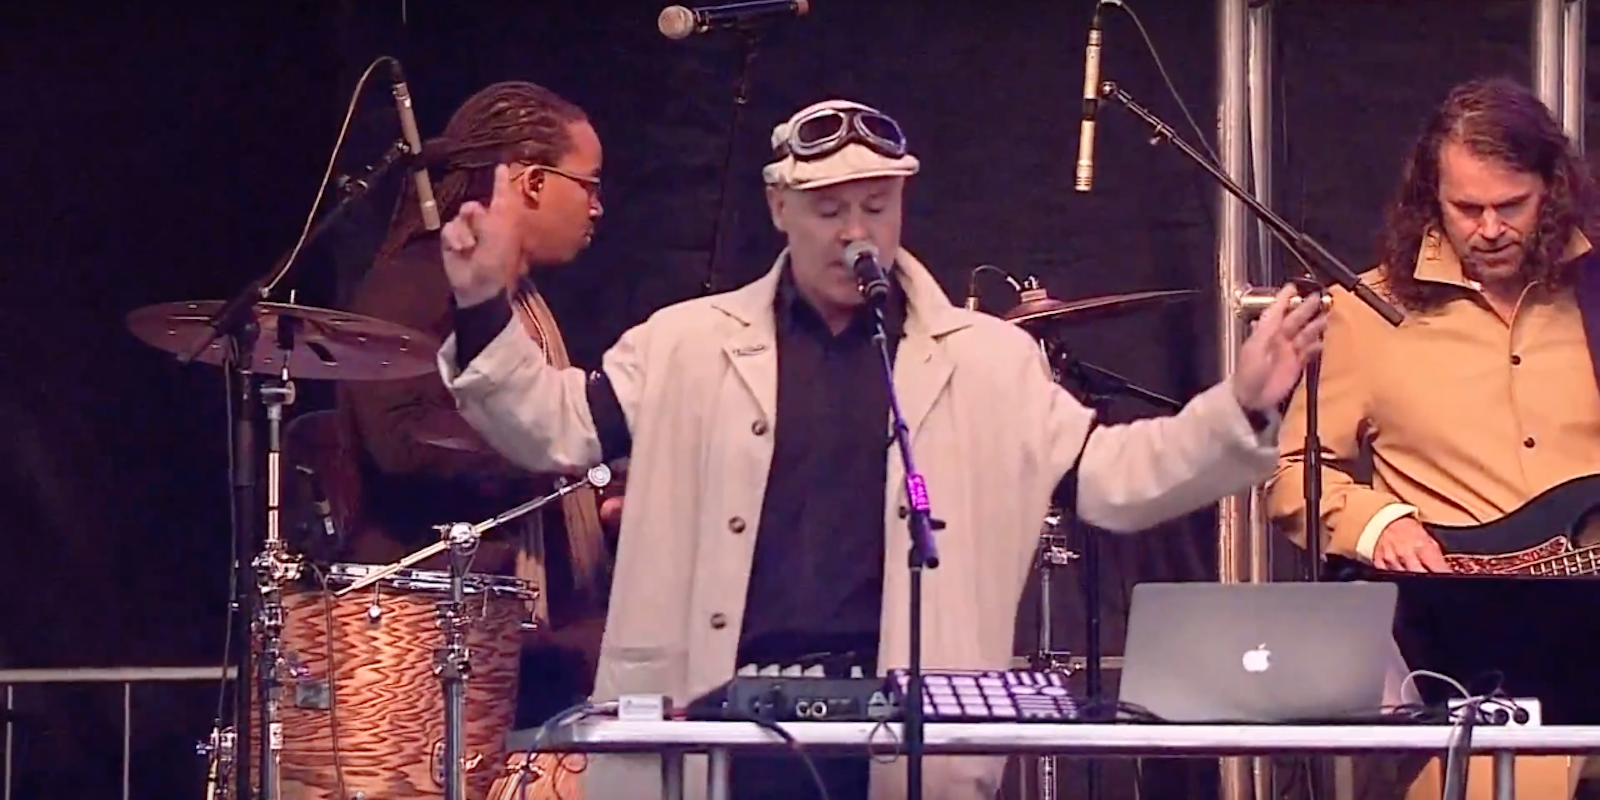 Thomas Dolby performs 'She Blinded Me With Science' at the March for Science